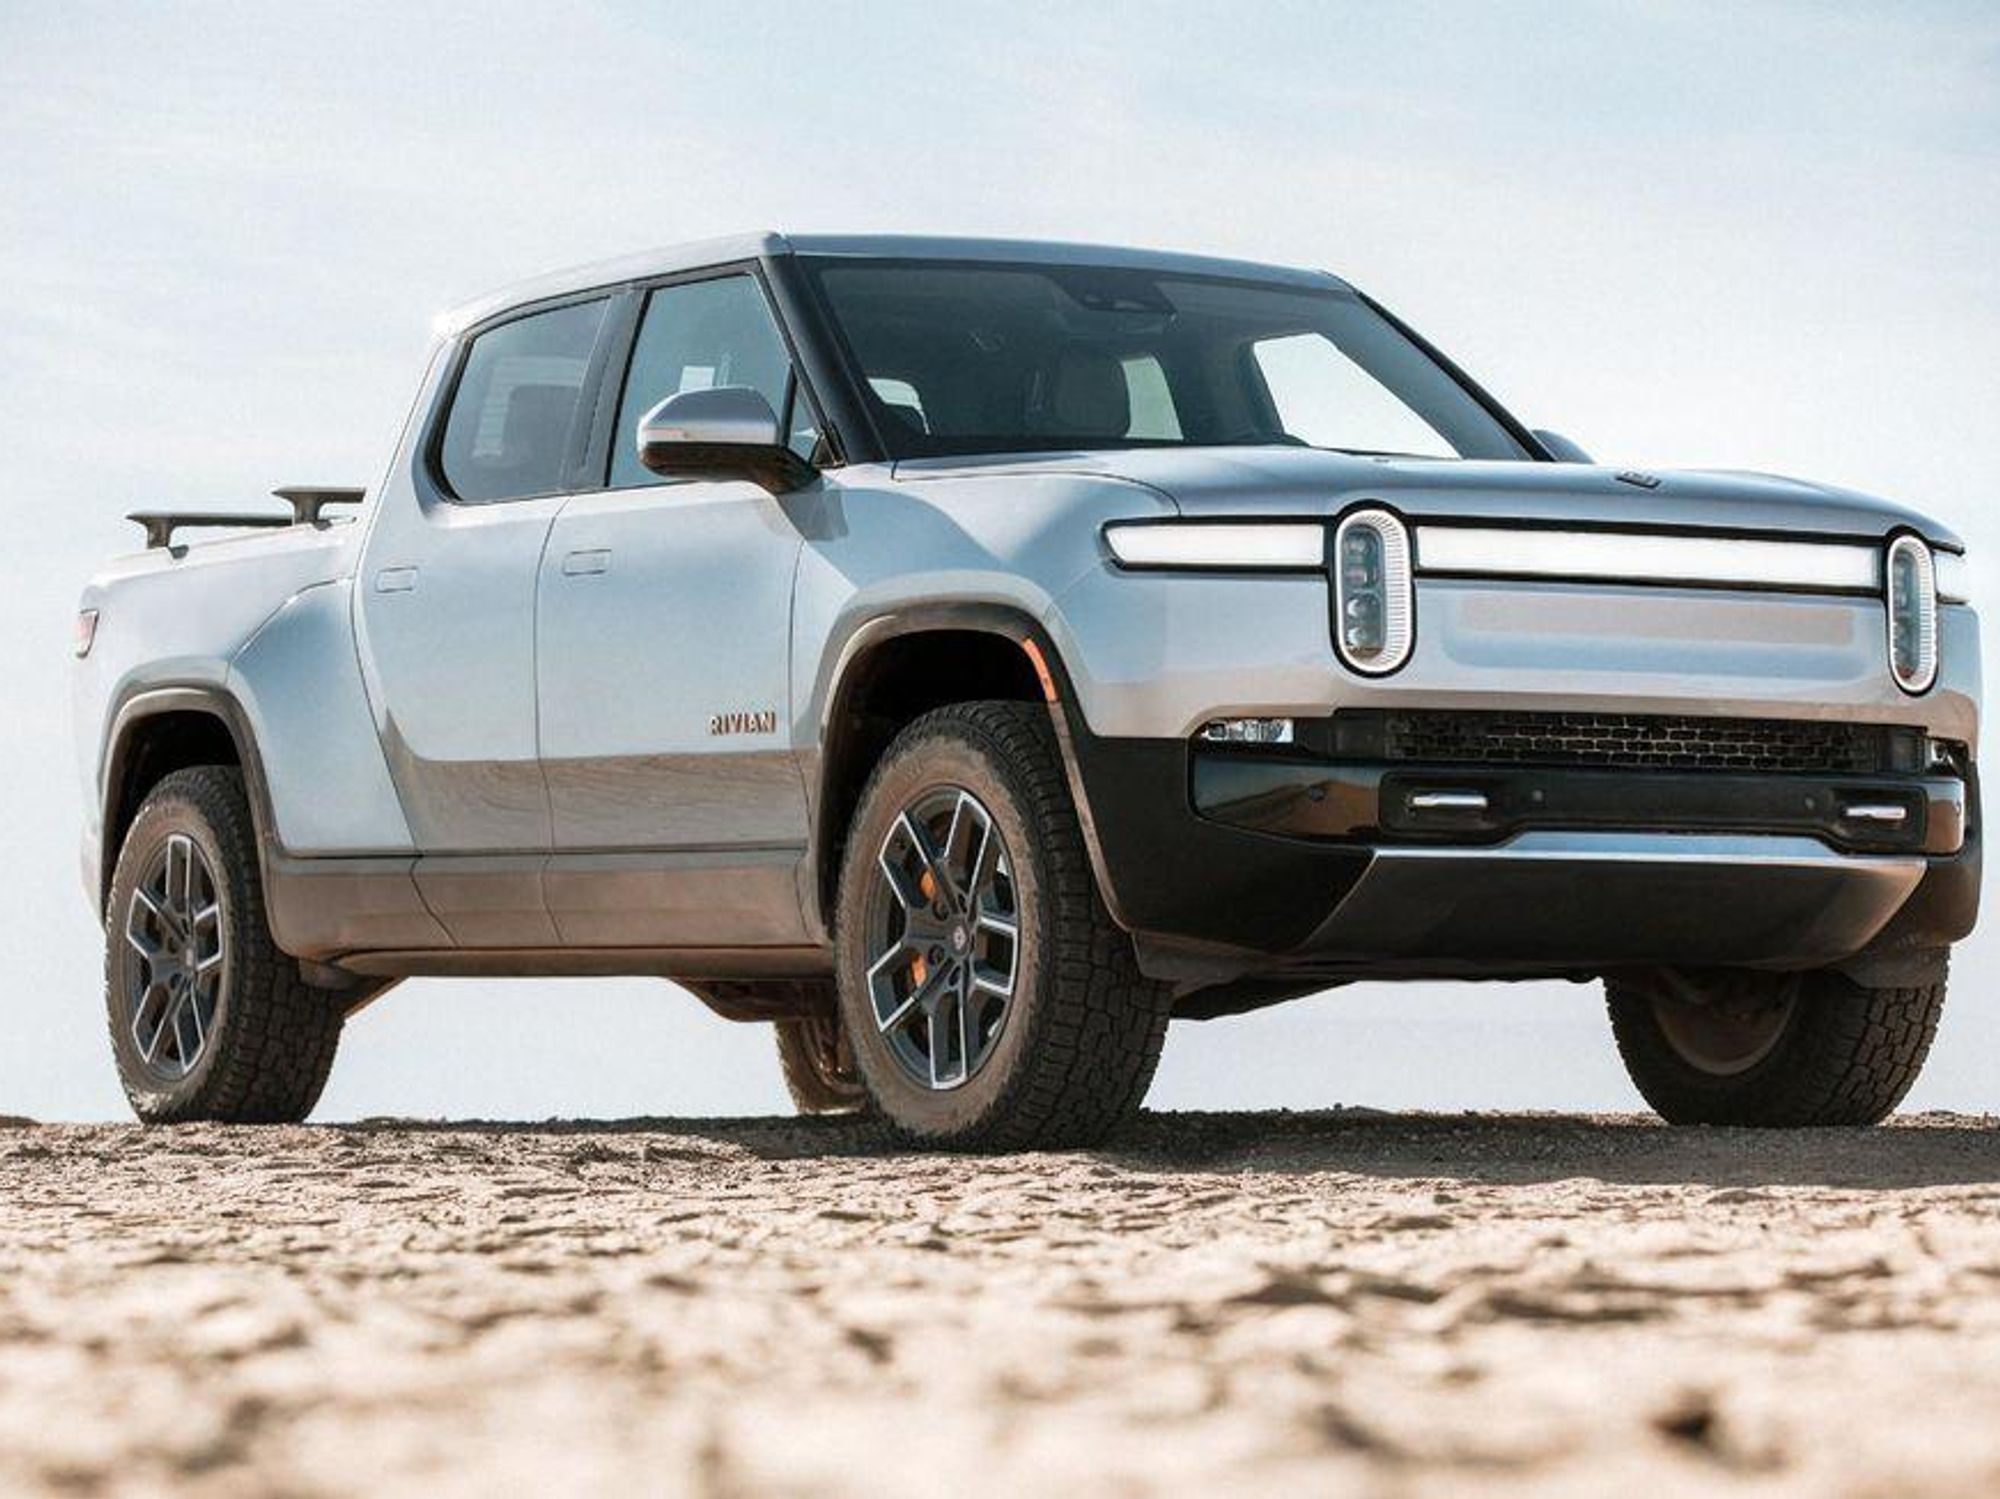 Rivian Stock Tanks on Missed Earnings Expectations, Shareholders Lawsuits